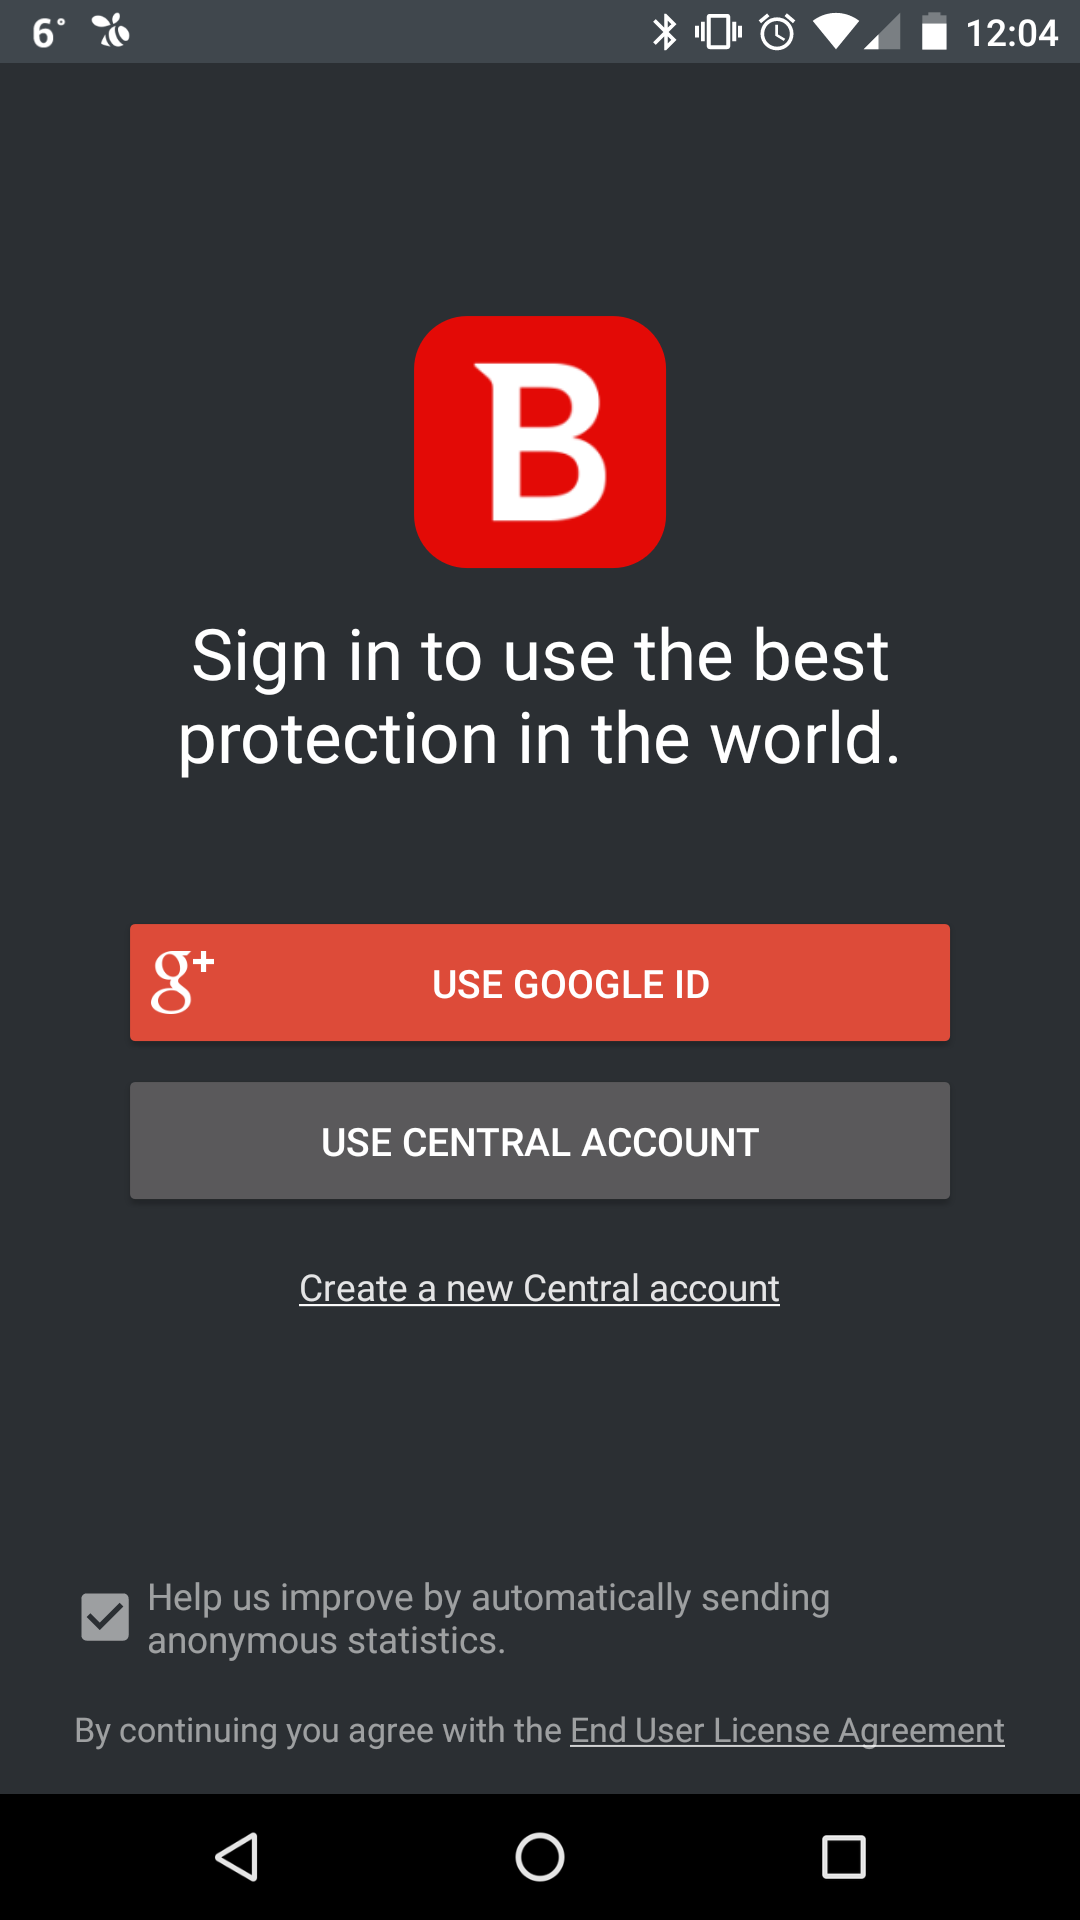 bitdefender mobile security for android